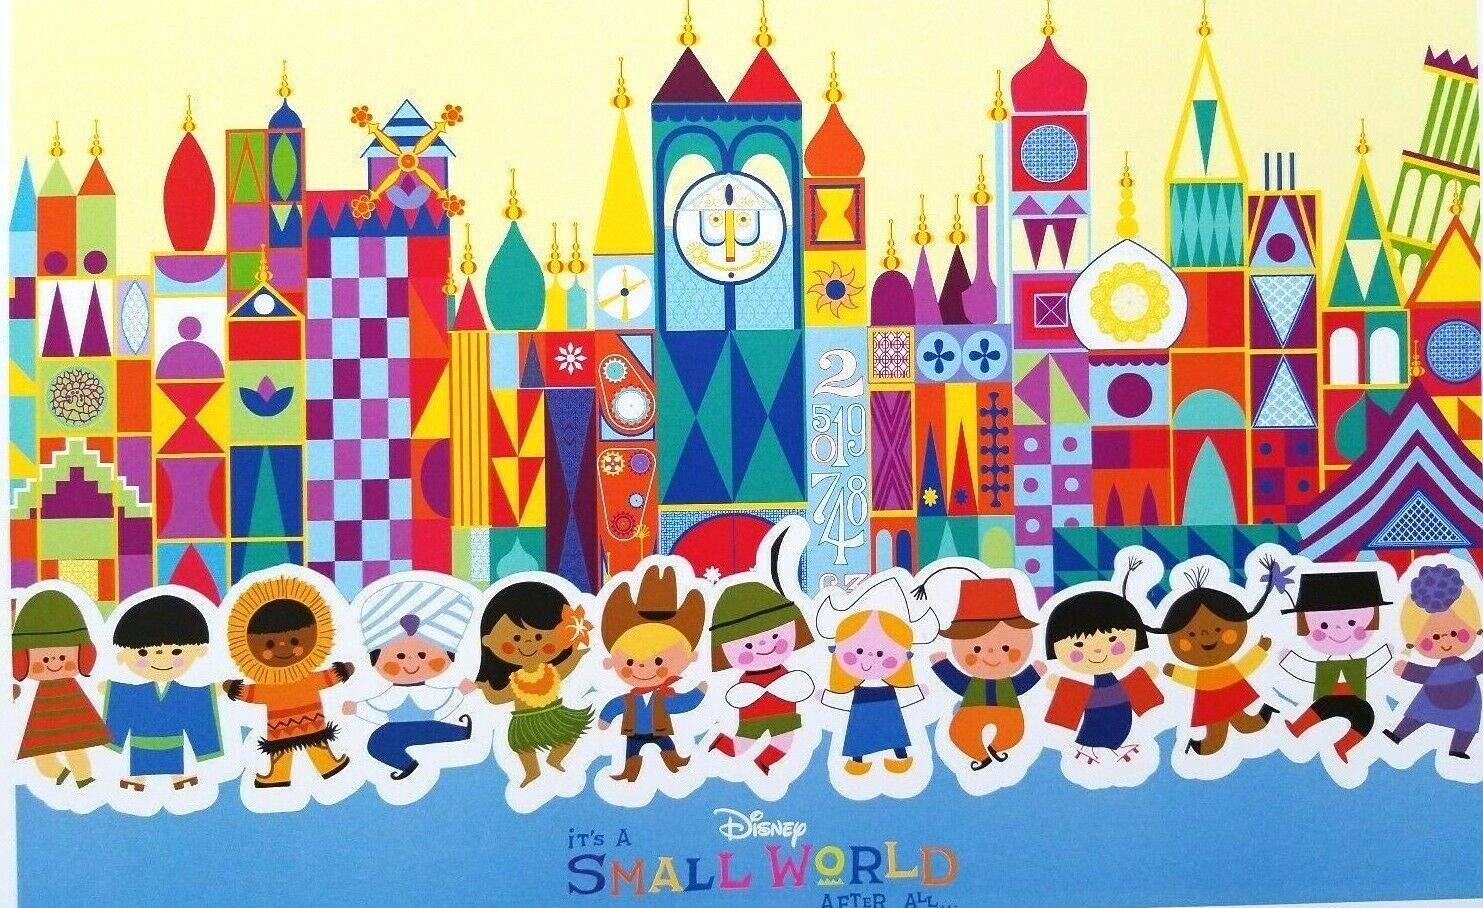 It\'s A Small World Mary Blair Art Poster Print 11x17 